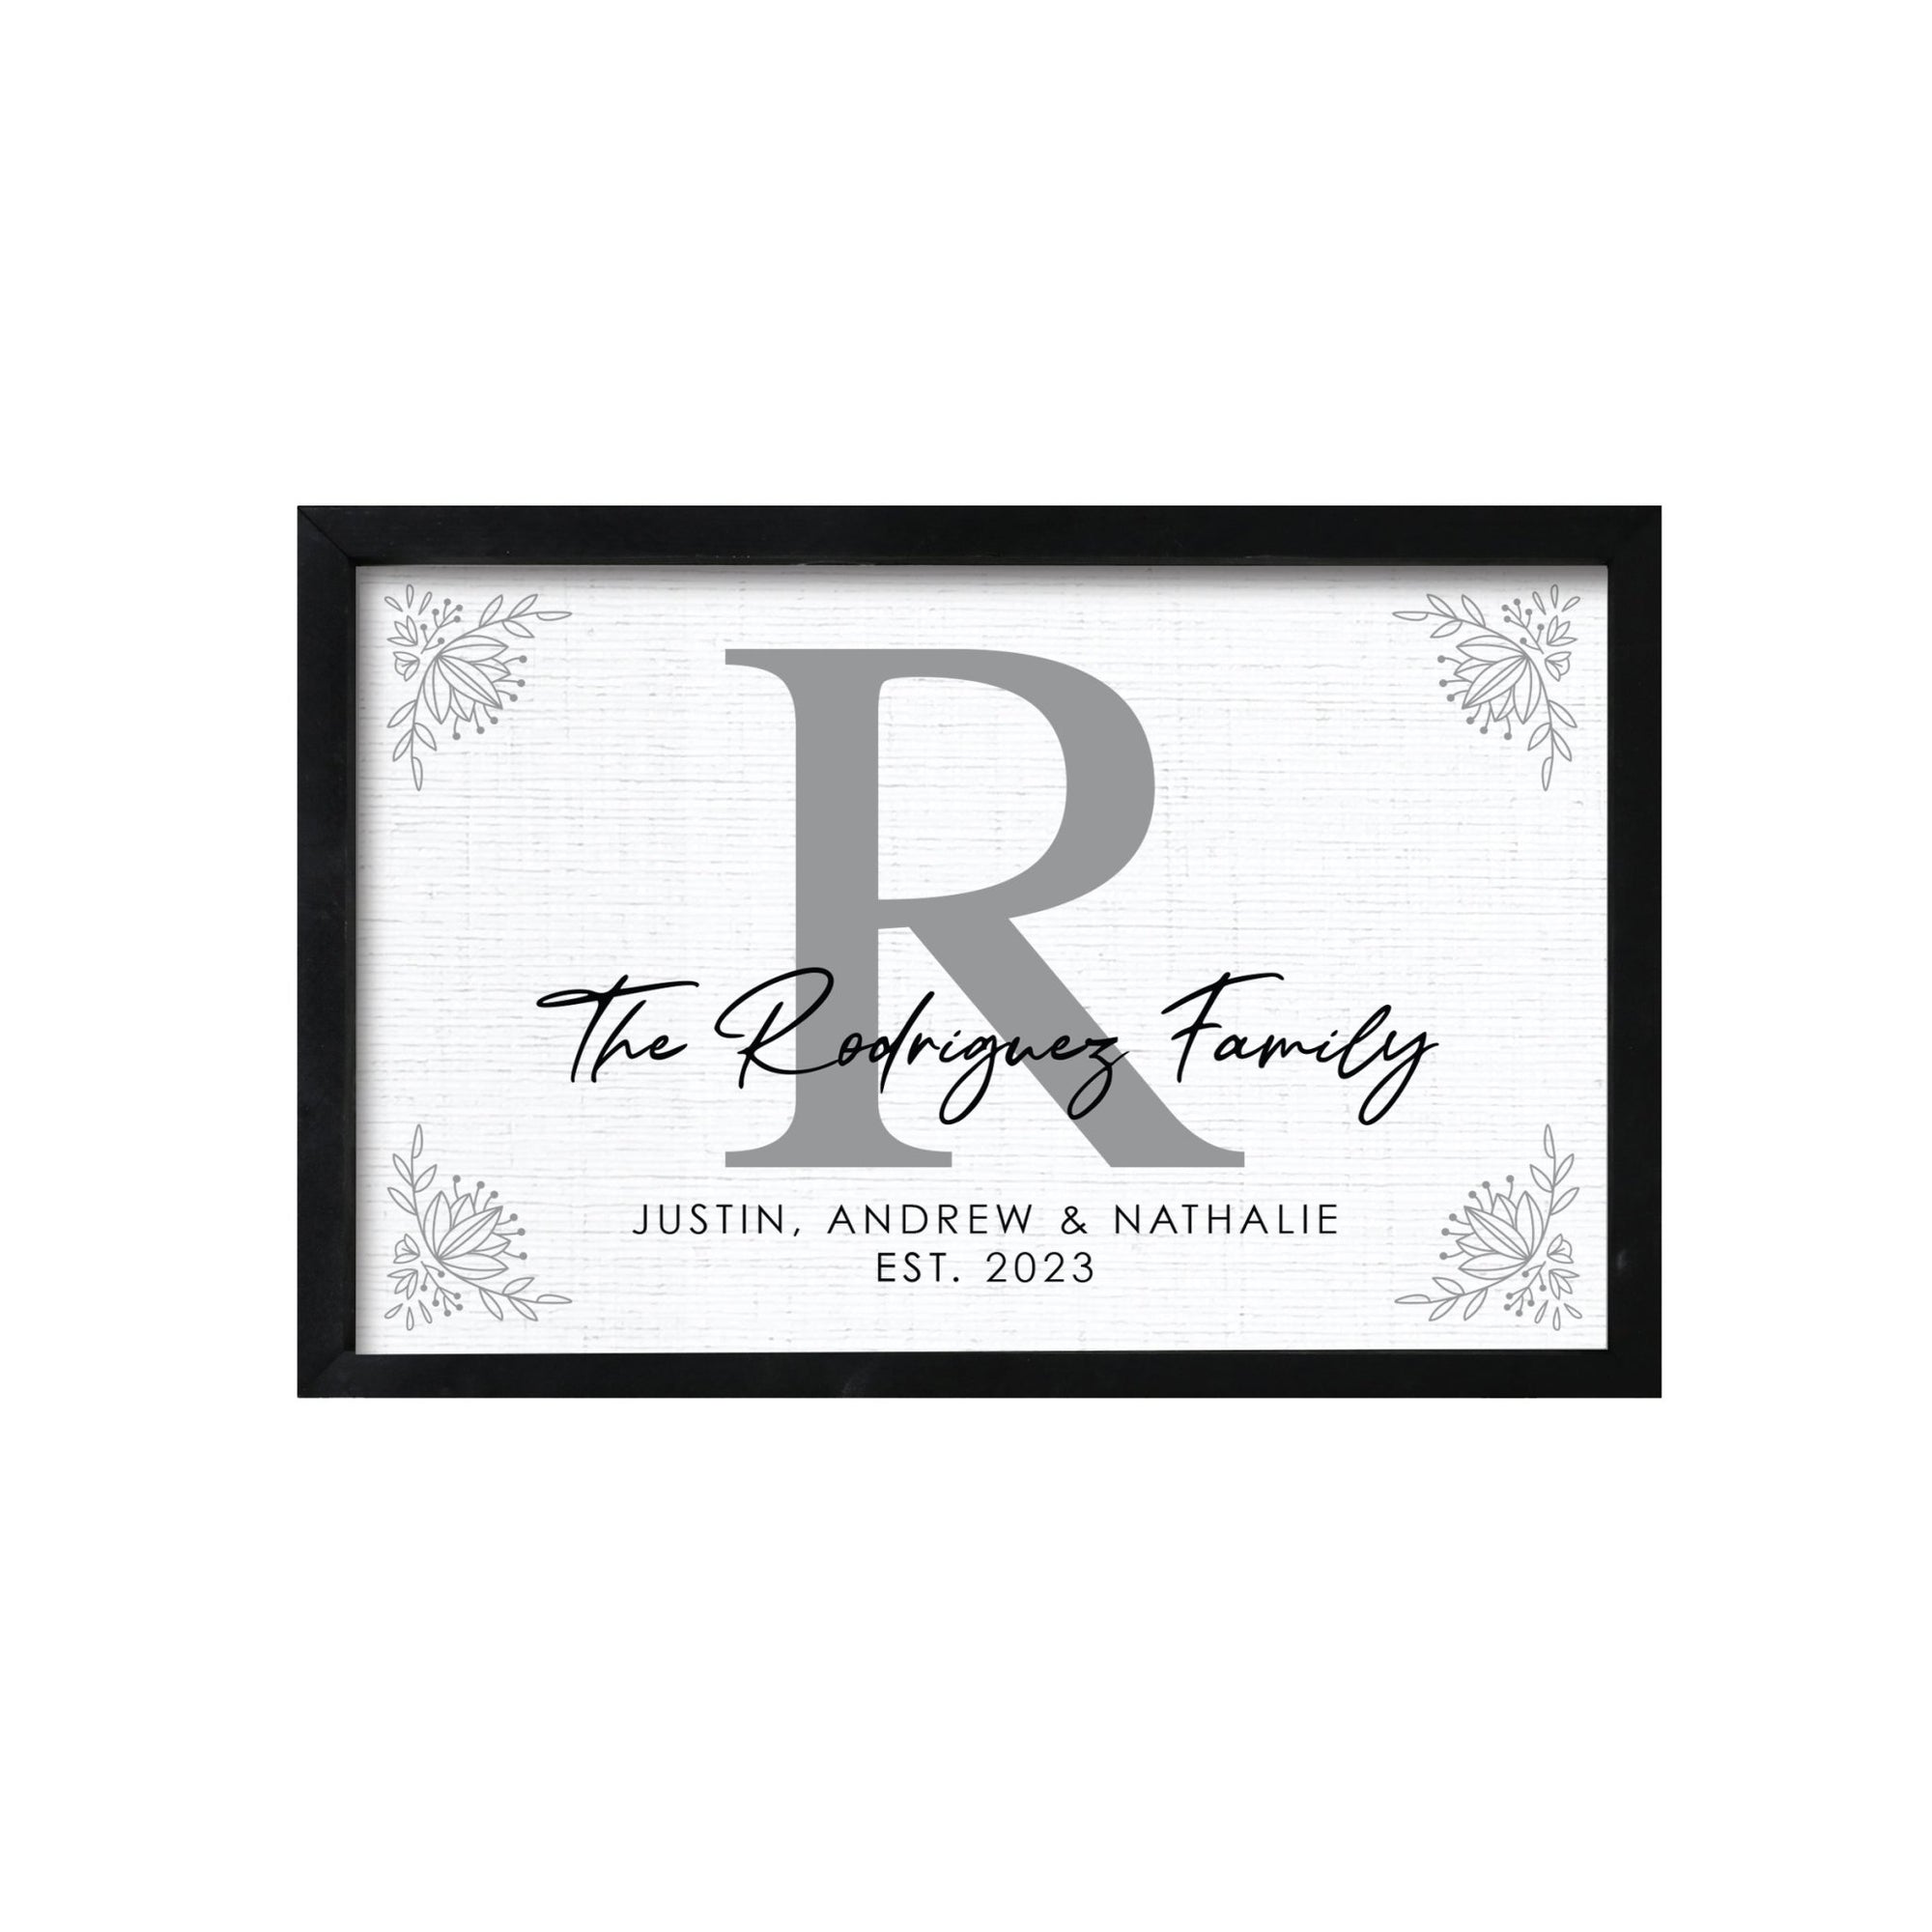 Customized Home Décor Framed Shadow Box With Family Name - The Rodriguez Family